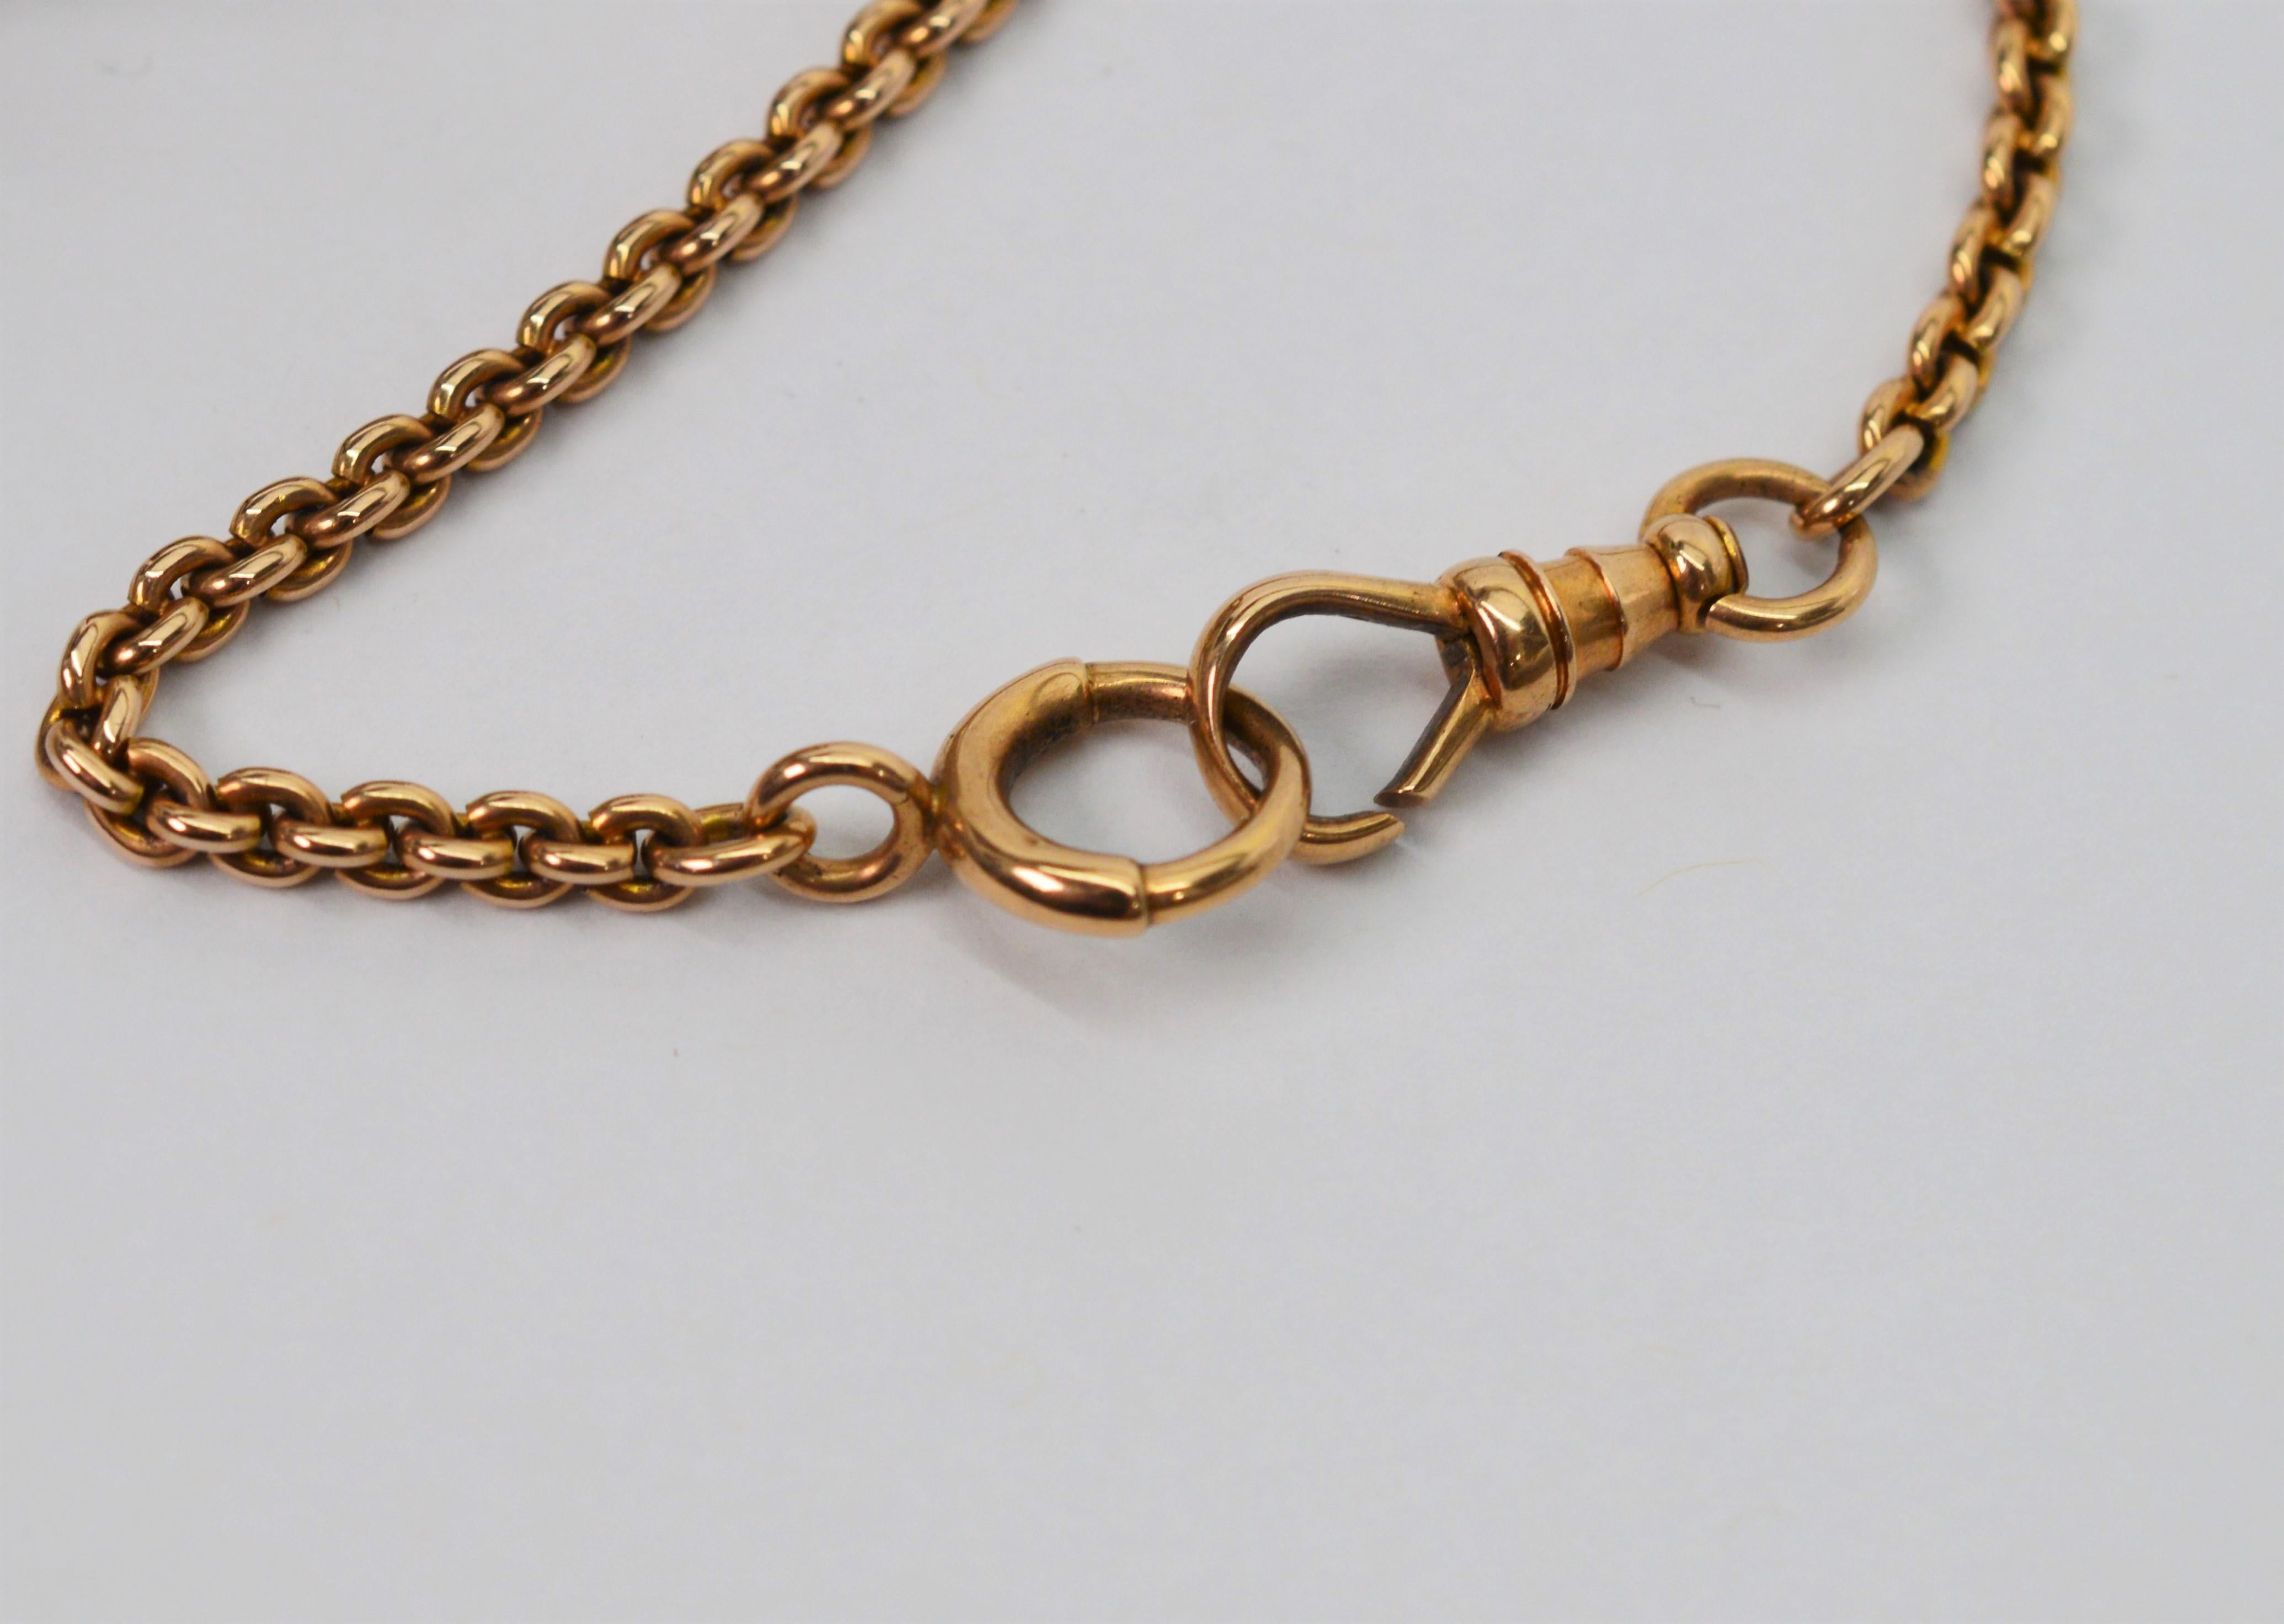 Yellow Gold Antique Watch Chain Necklace with Locket Charm Fob 1